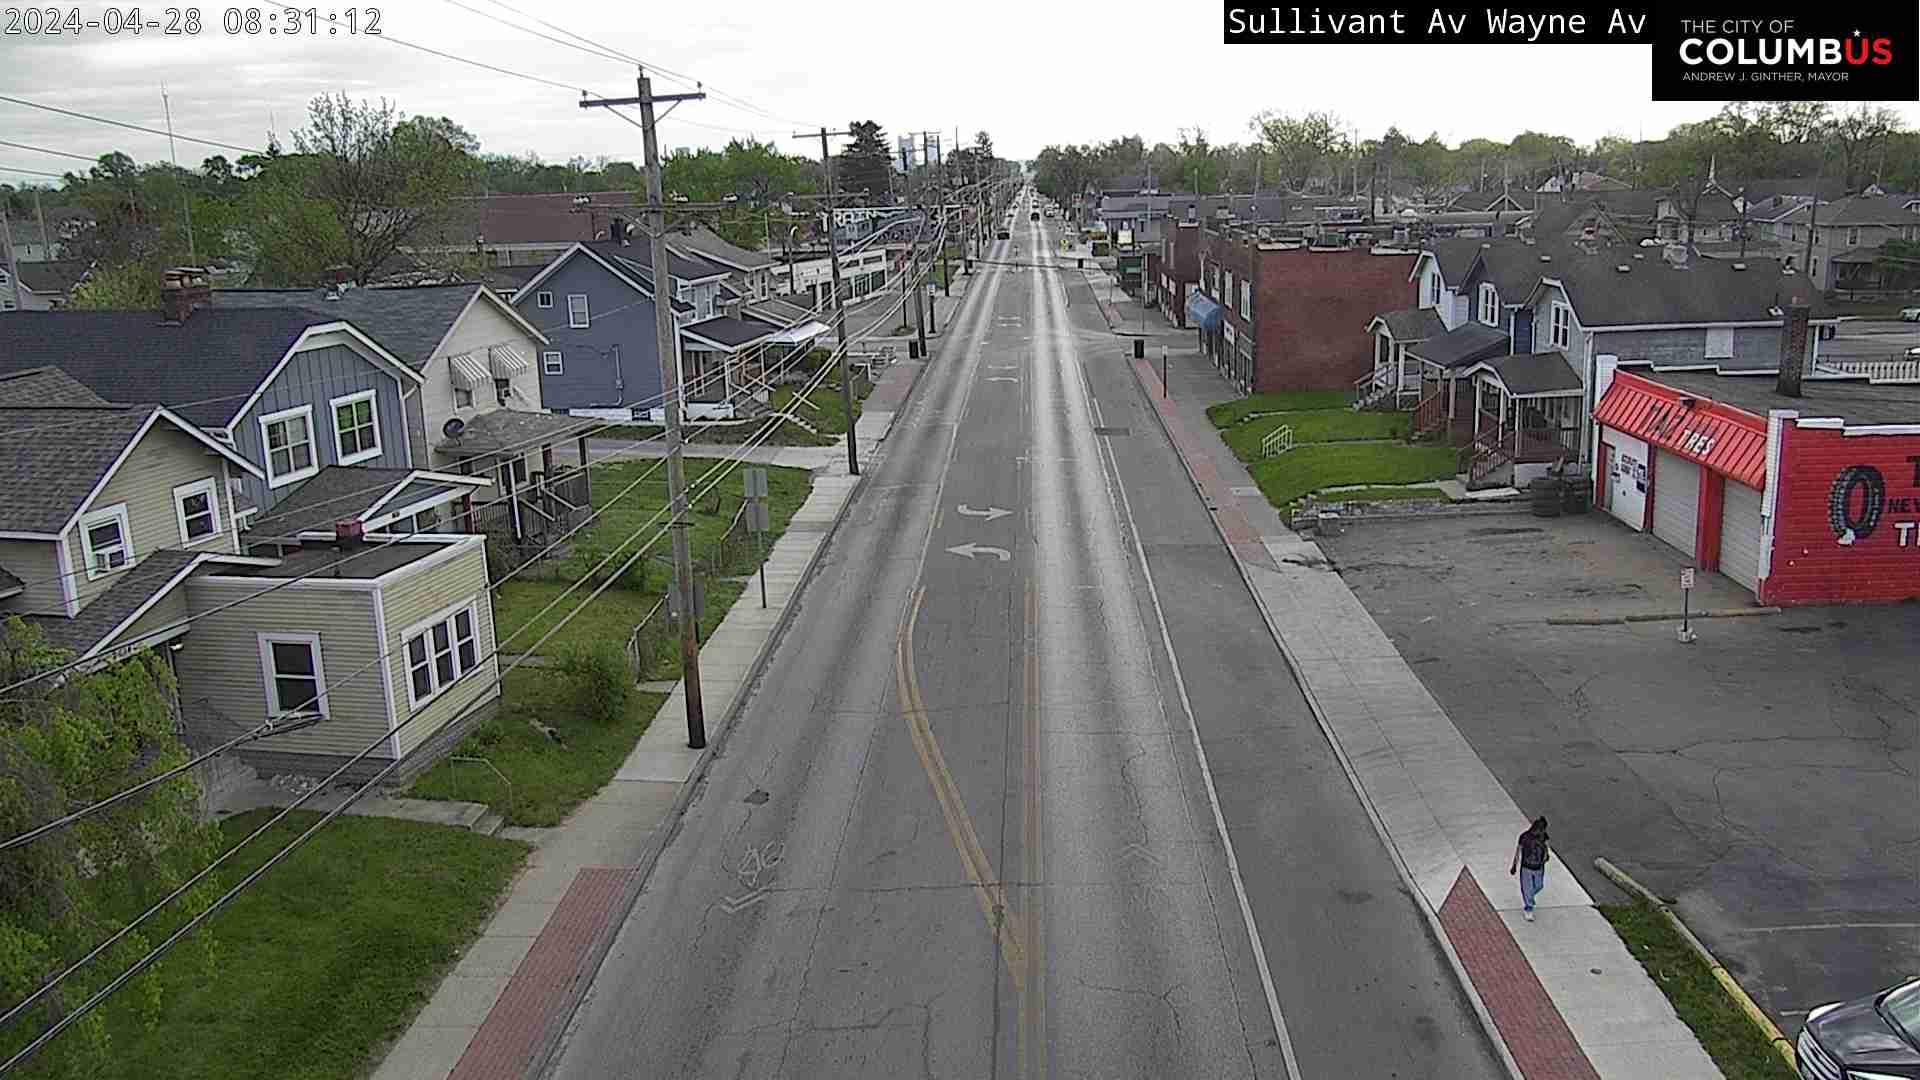 Traffic Cam Valleyview: City of Columbus) Sullivant Ave at Wayne Ave Player